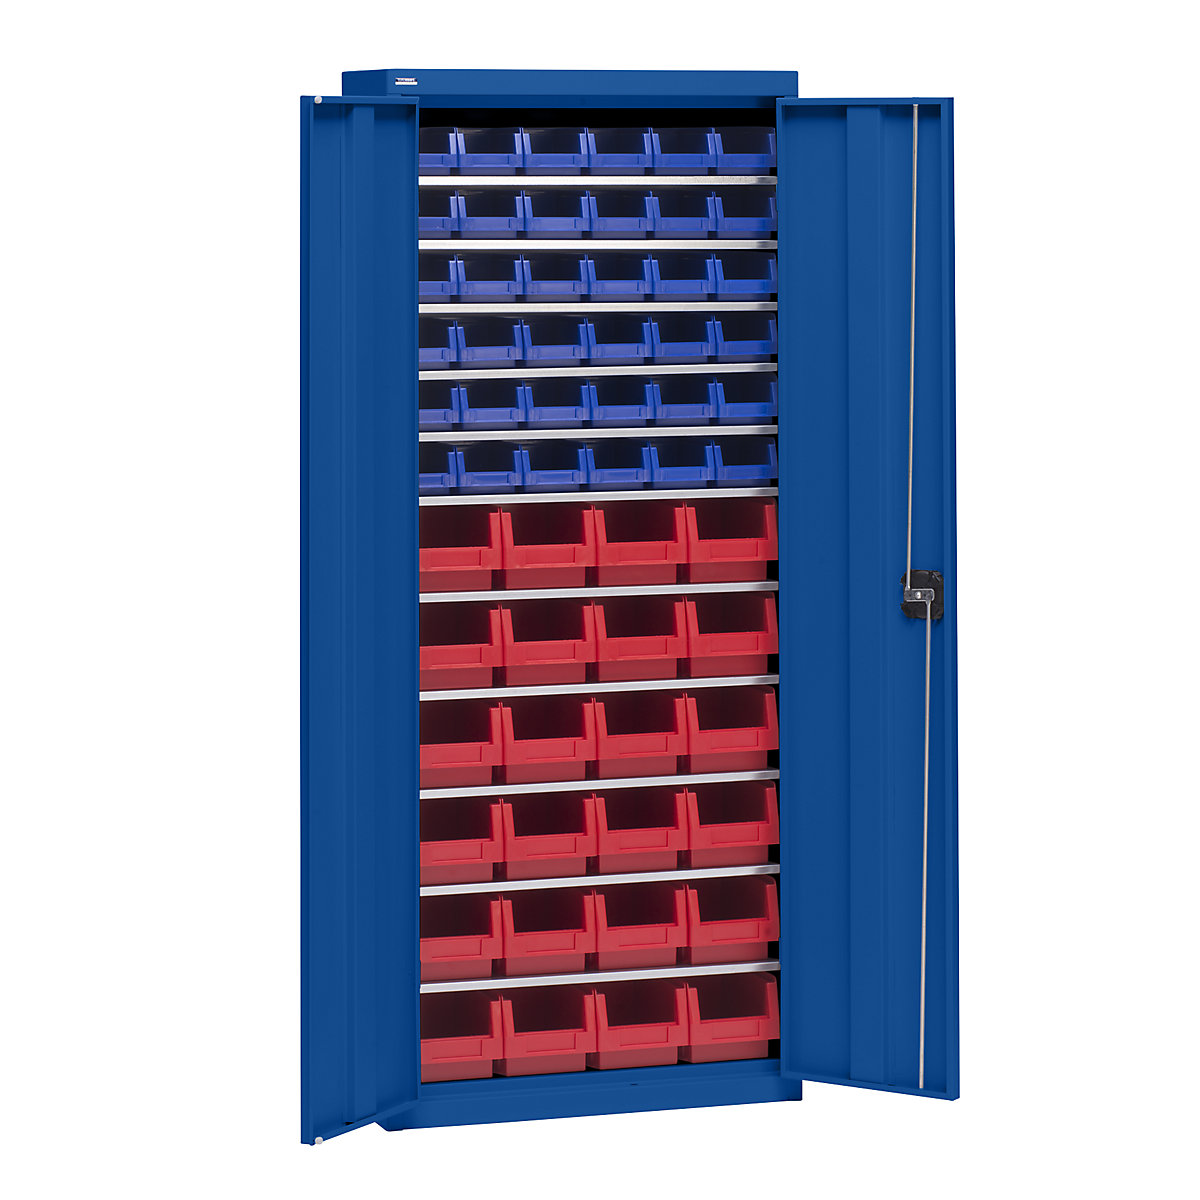 Storage cupboard with storage boxes – eurokraft pro, height 1575 mm, 11 shelves, gentian blue-4